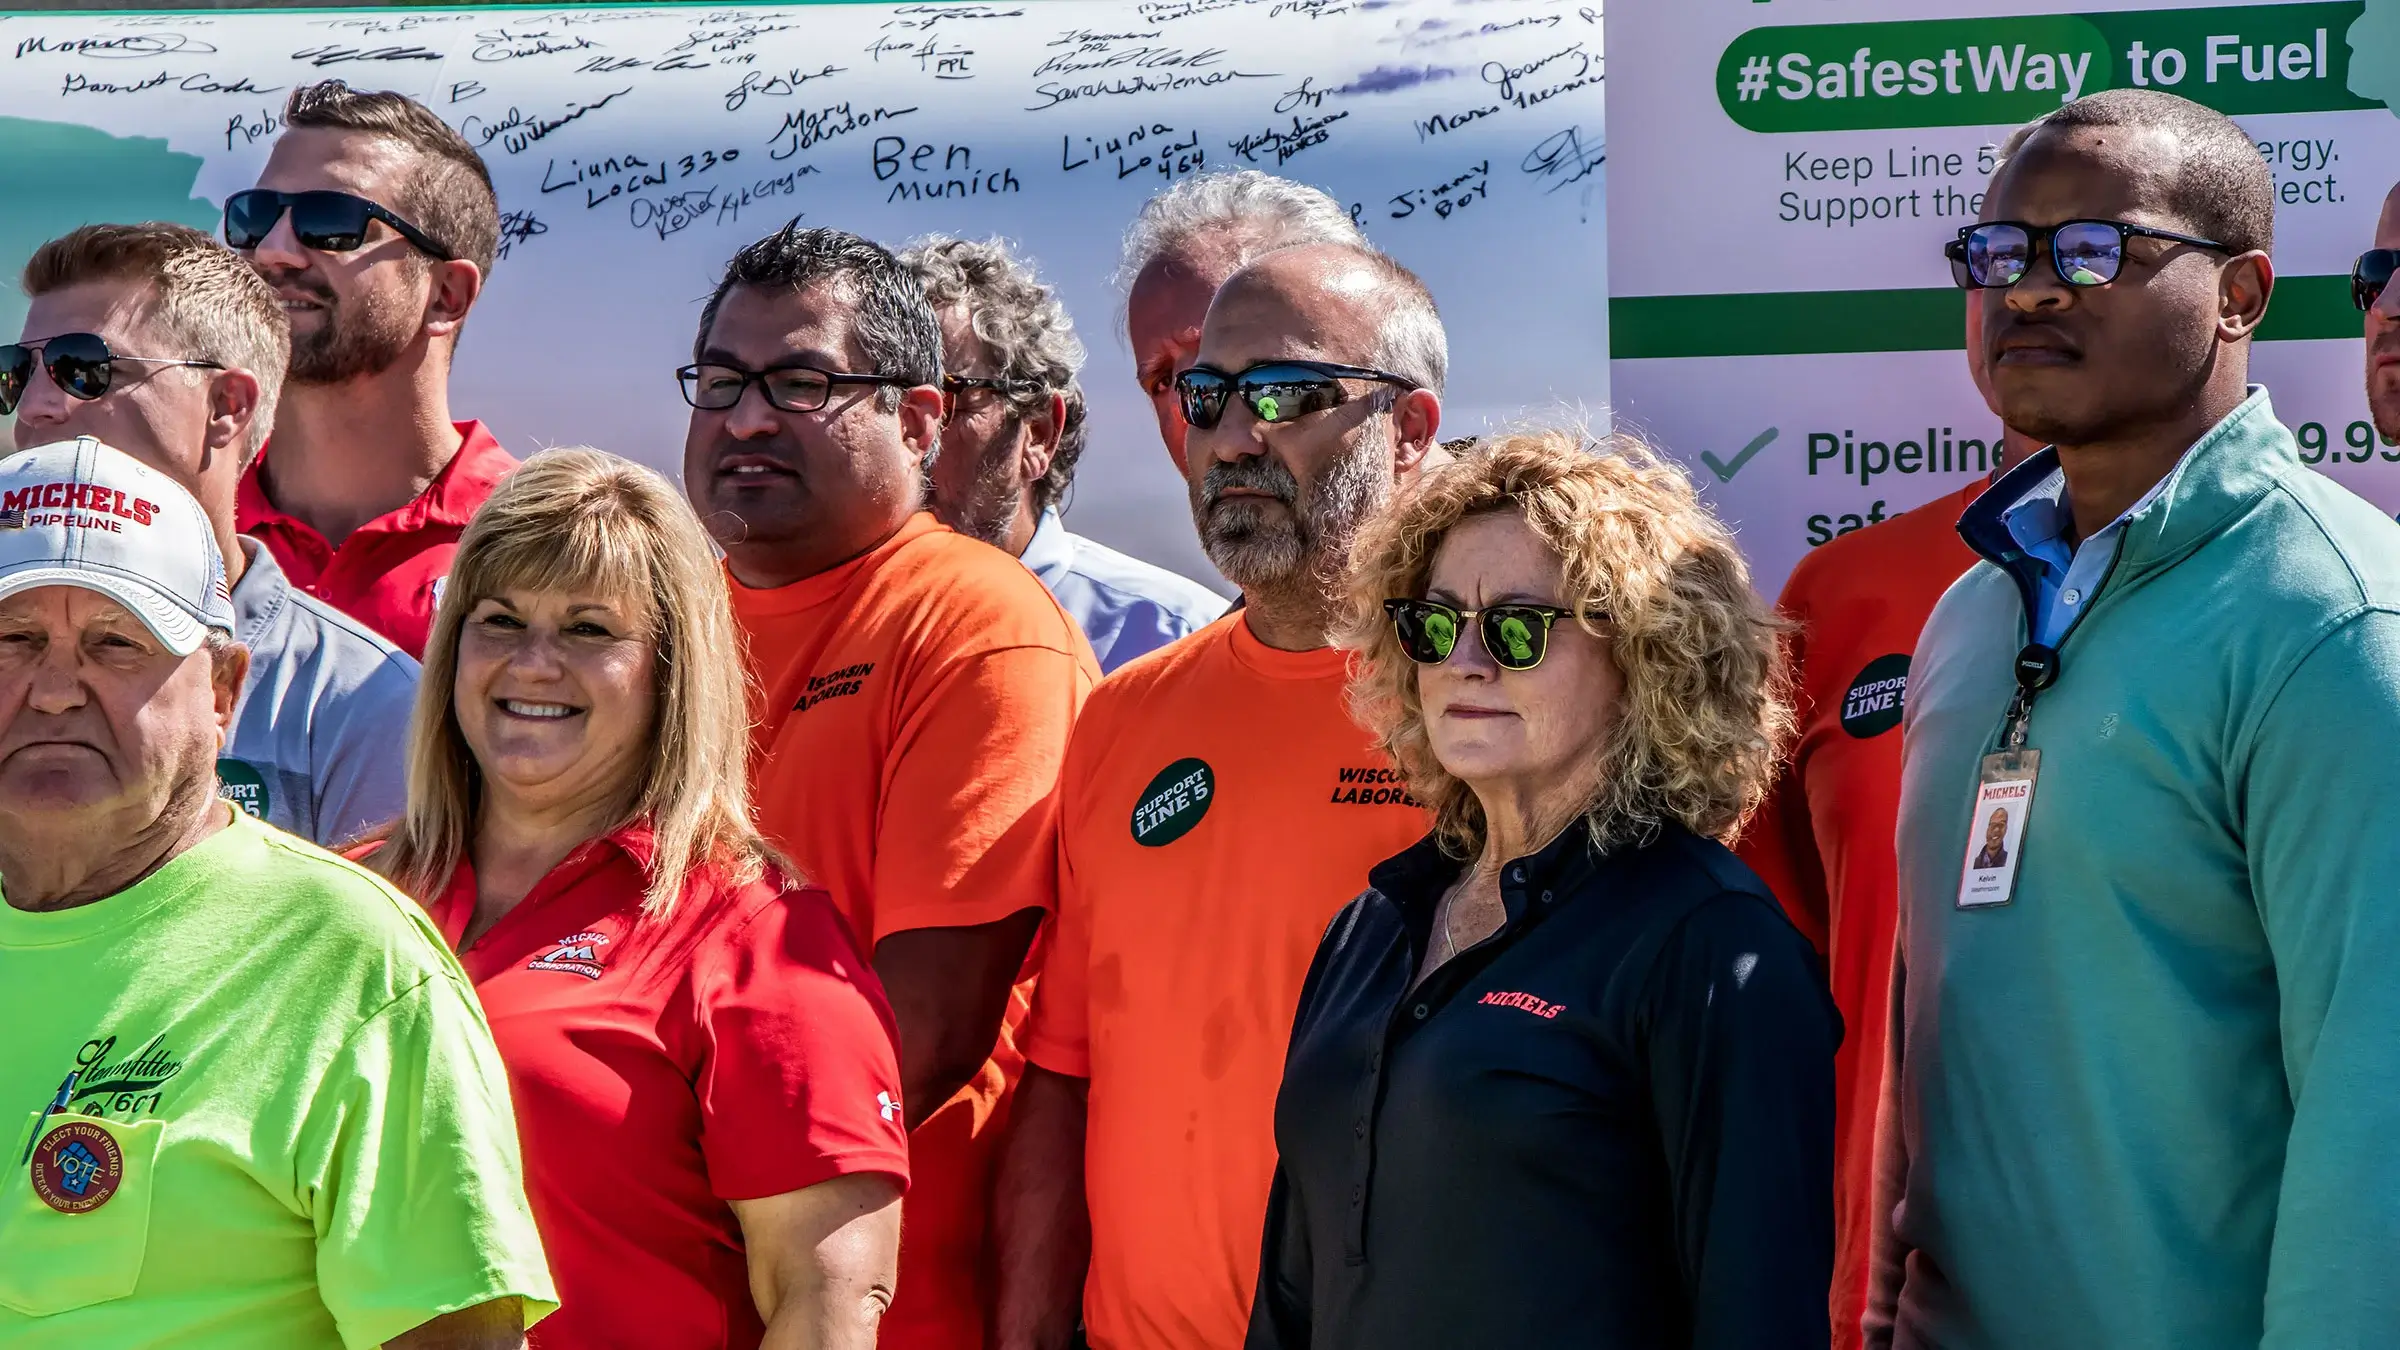 Michels employees participating in the Wisconsin Jobs and Energy Coalition #SafestWay Tour to promote construction of Enbridge Line 5 in Wisconsin.